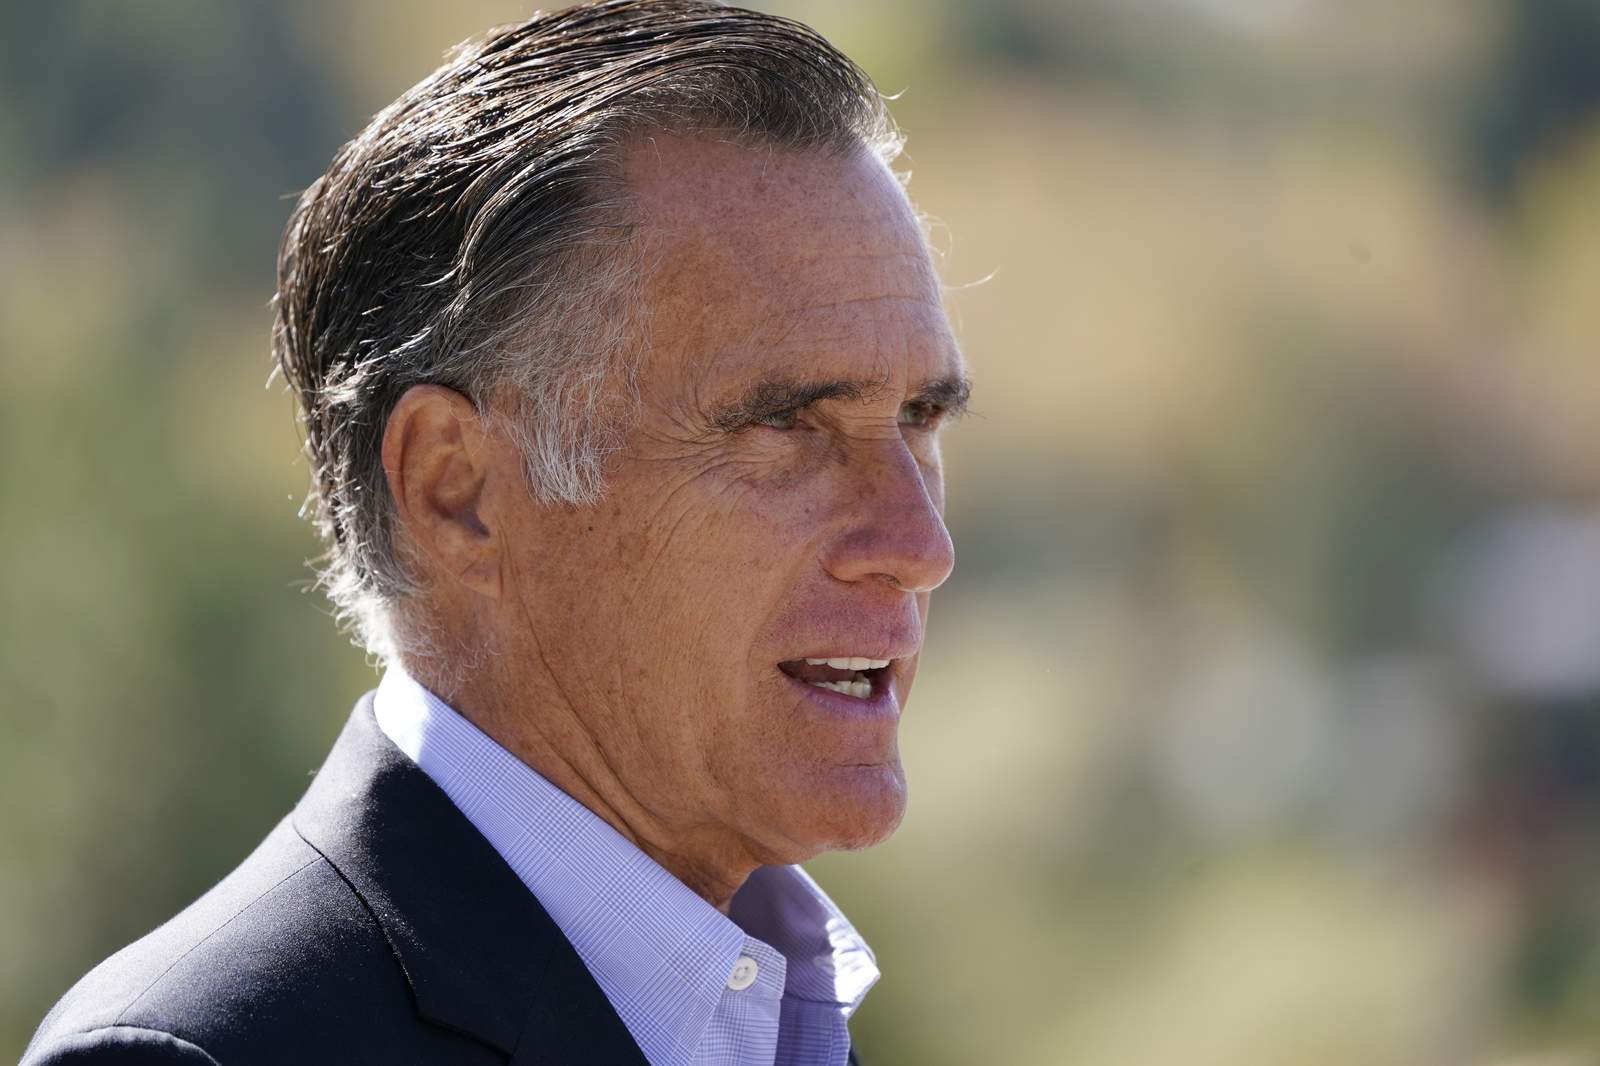 Romney: Trump’s election fraud claim wrong, ‘reckless’